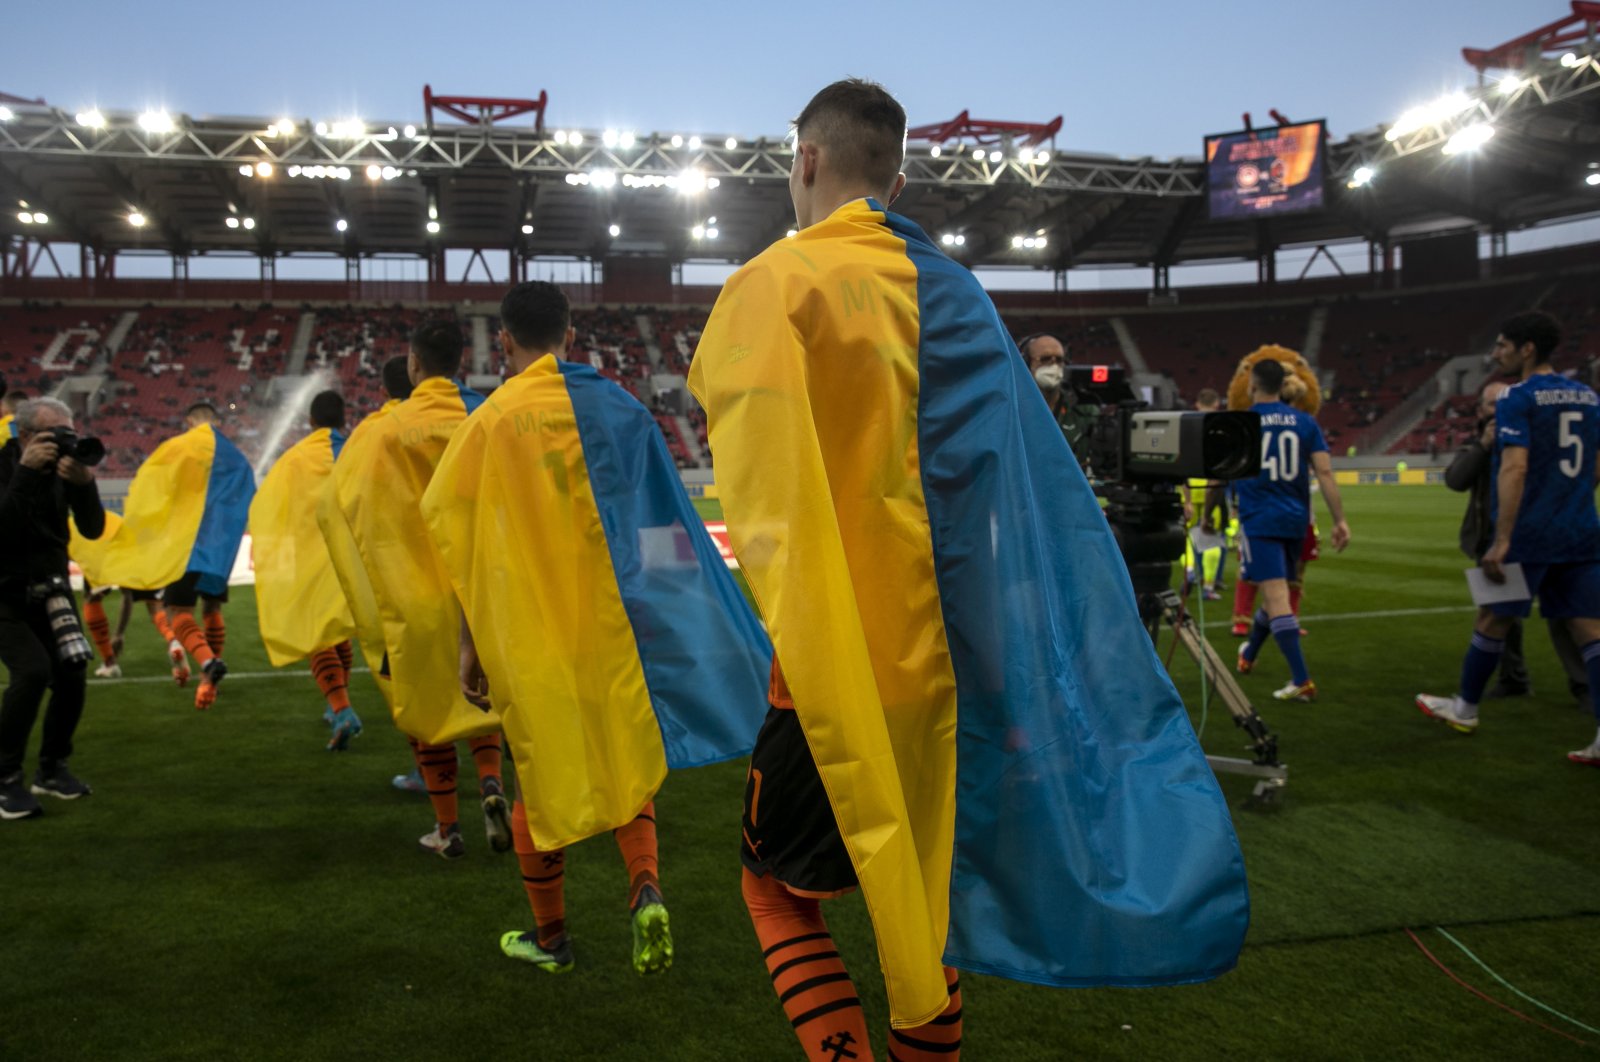 Shakhtar Donetsk players enter the pitch ahead of a friendly match against Olympiakos, Athens, Greece, April 9, 2022. (AP Photo)